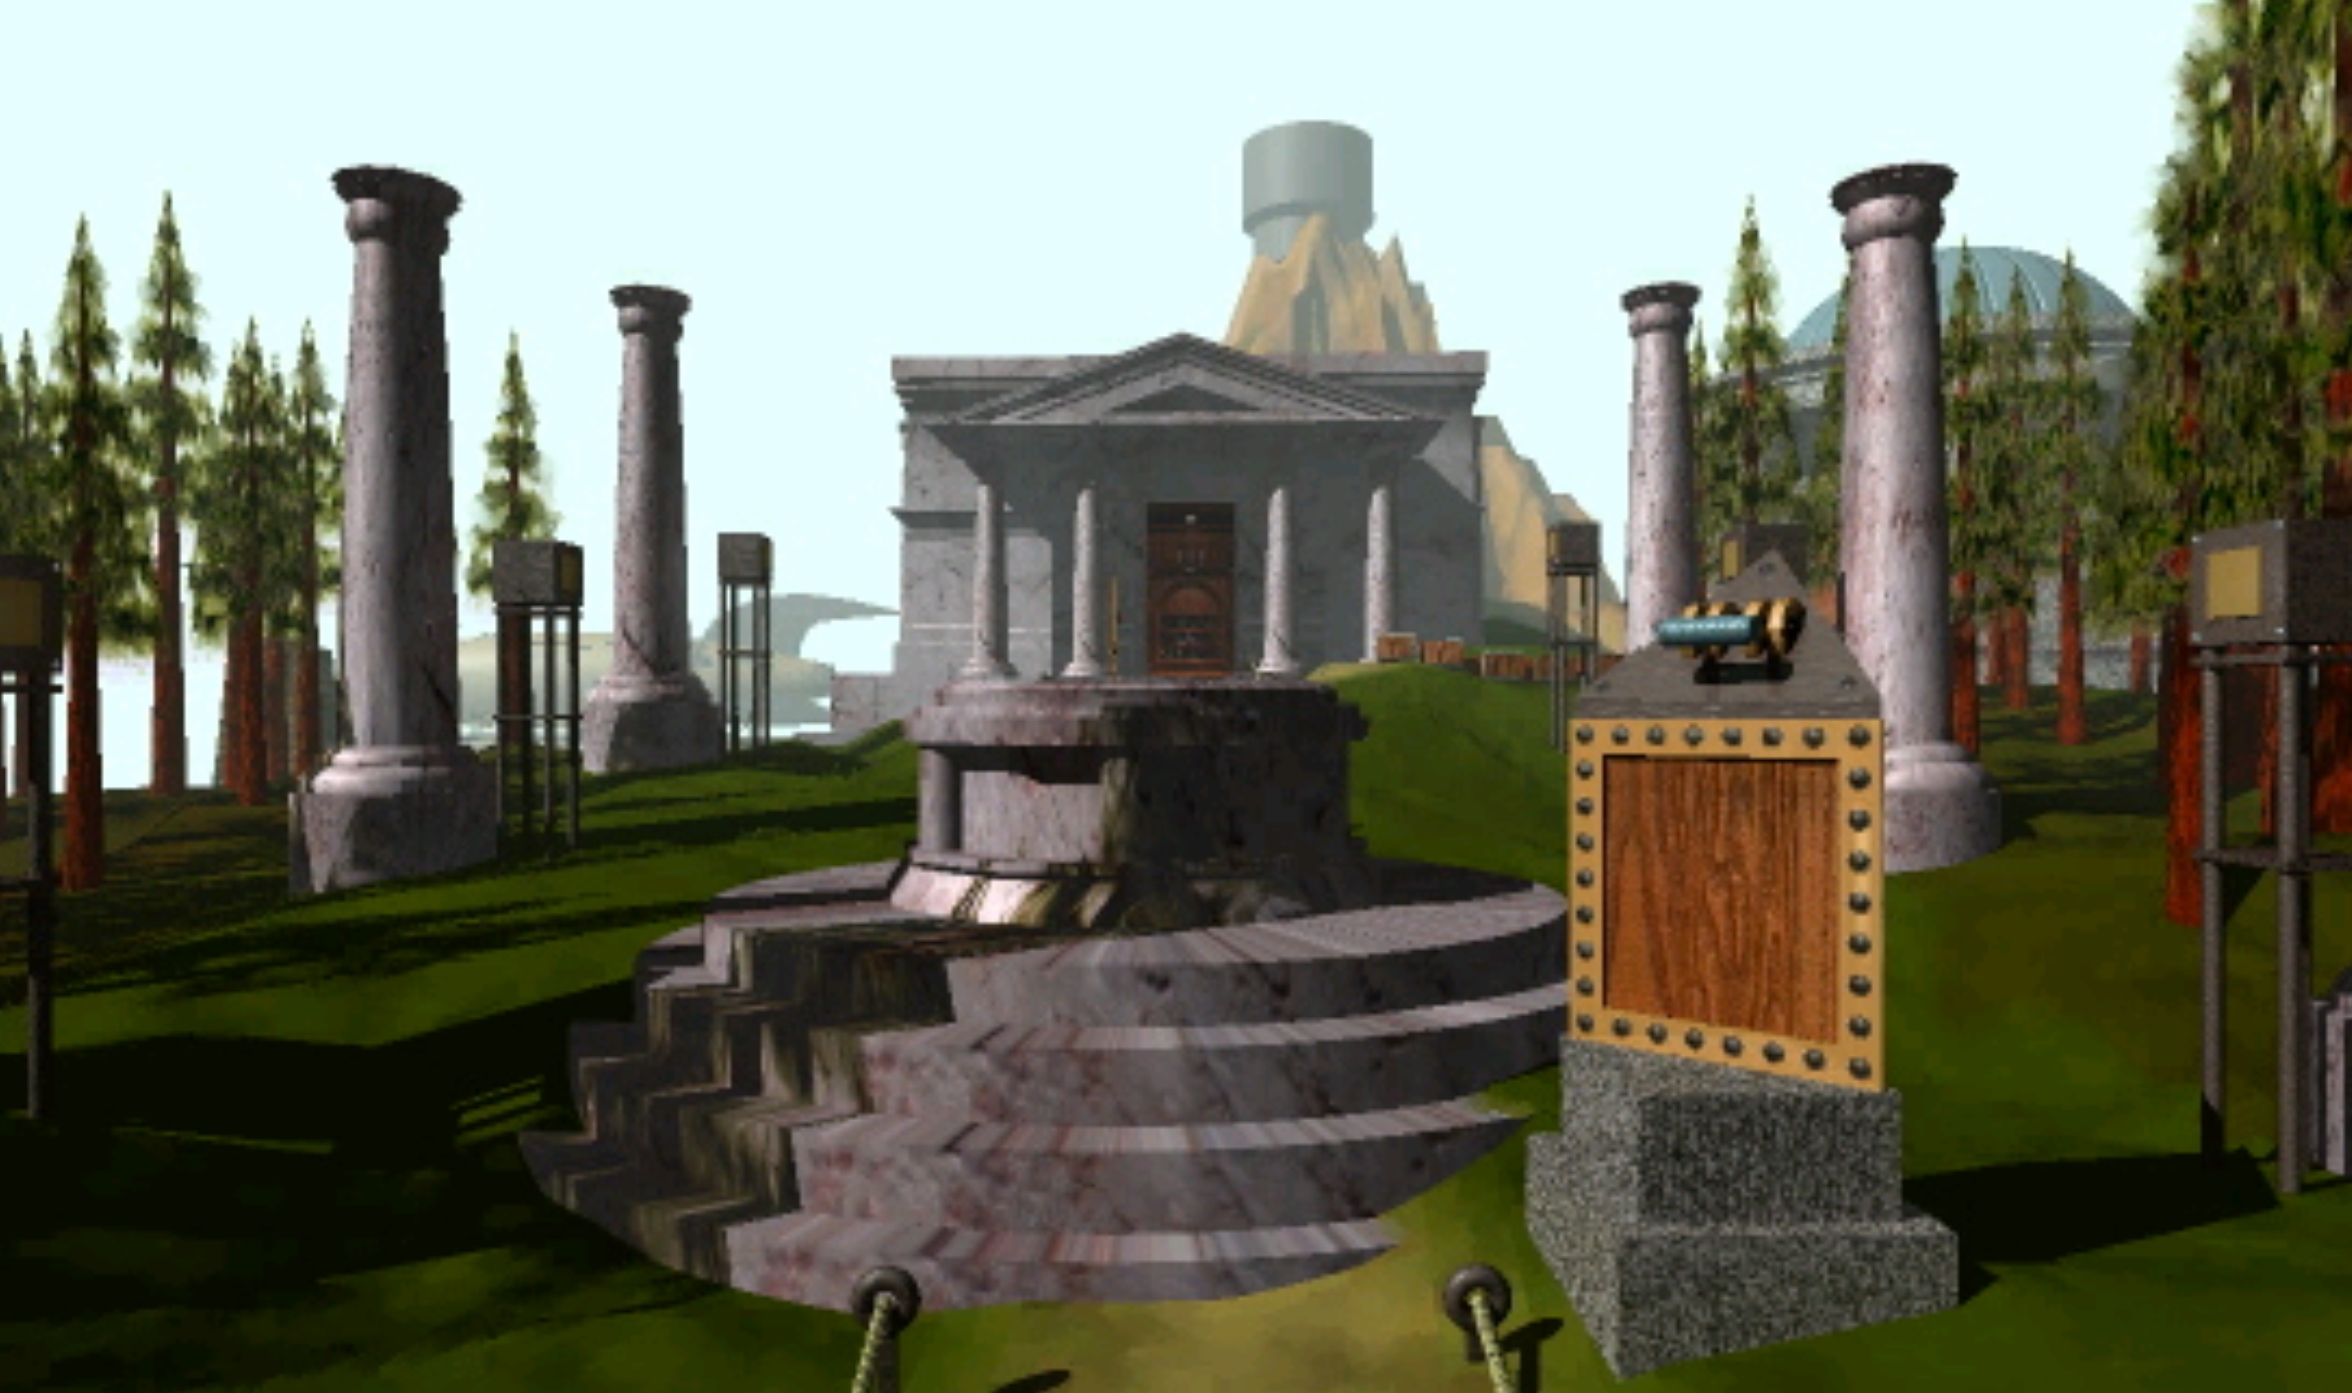 play myst video game